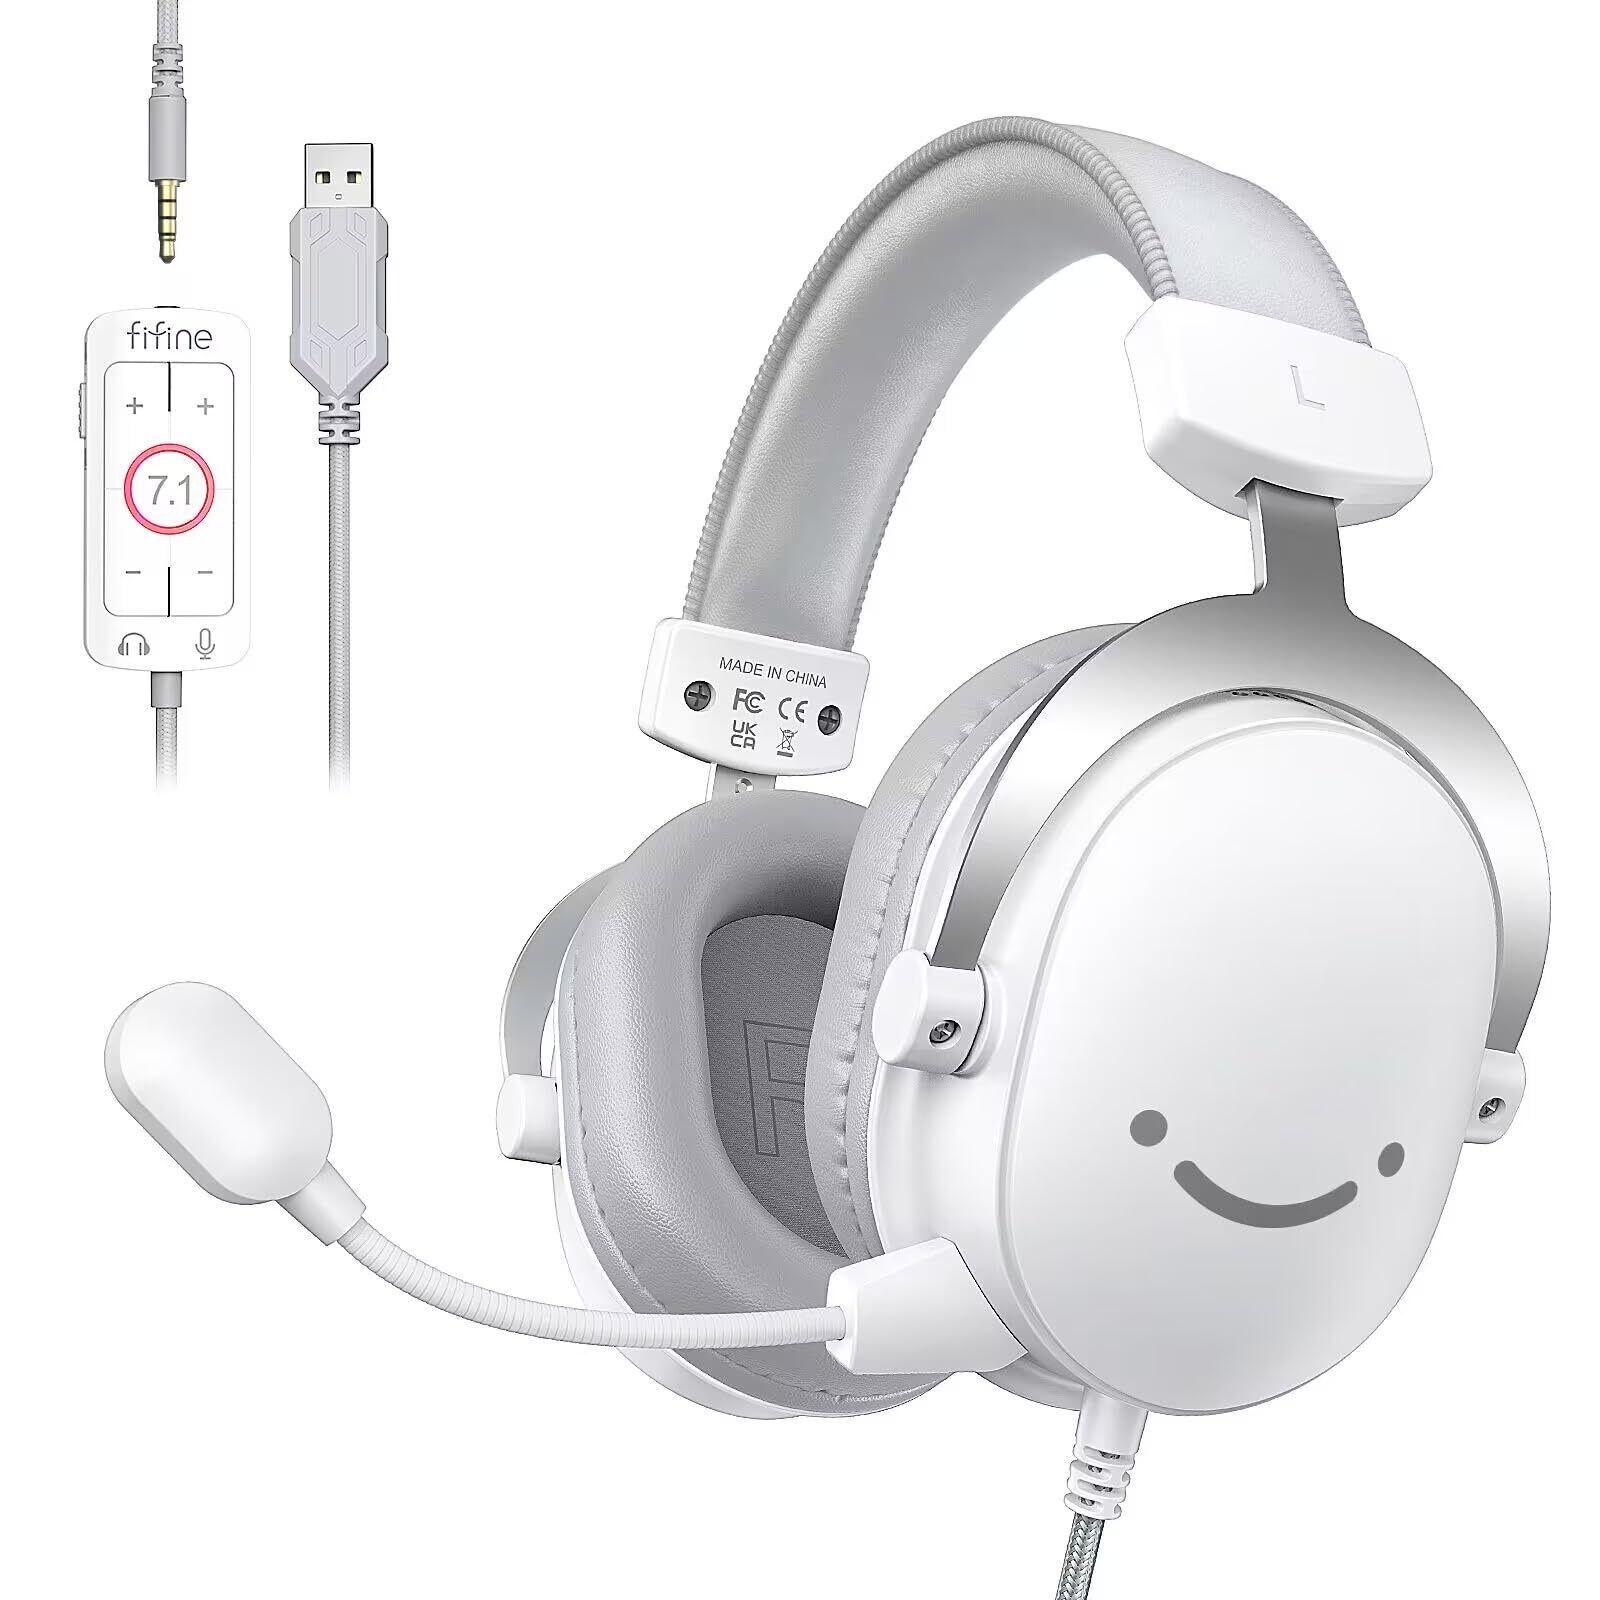 USB PC Gaming Headset with 3.5mm Audio Jack, Detachable Microphone, 7.1 Surround